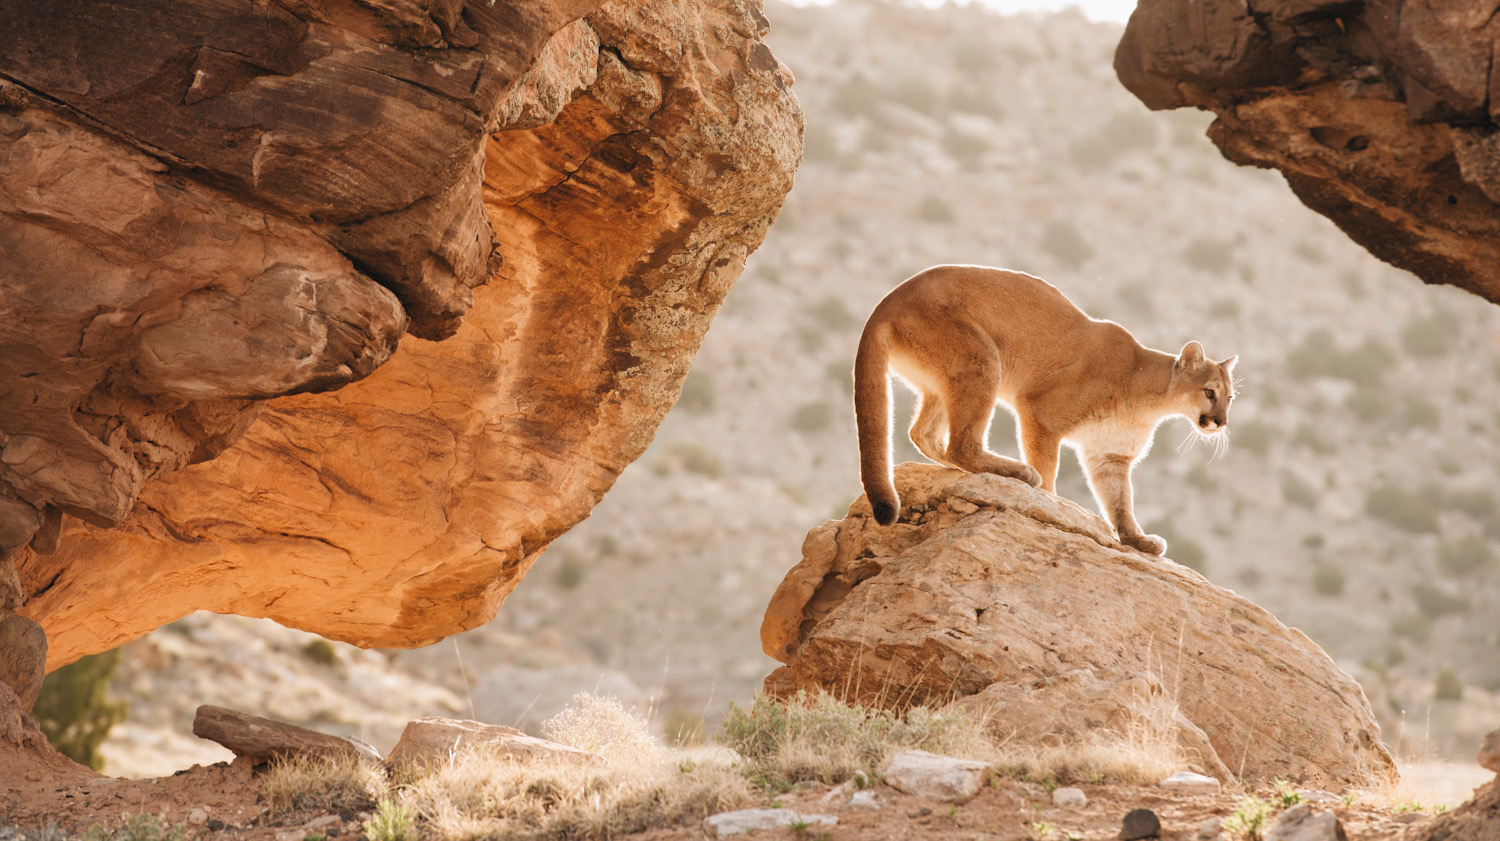 Photo shows a puma, or mountain lion, perched on a rock. Puma conservation is more important than ever.